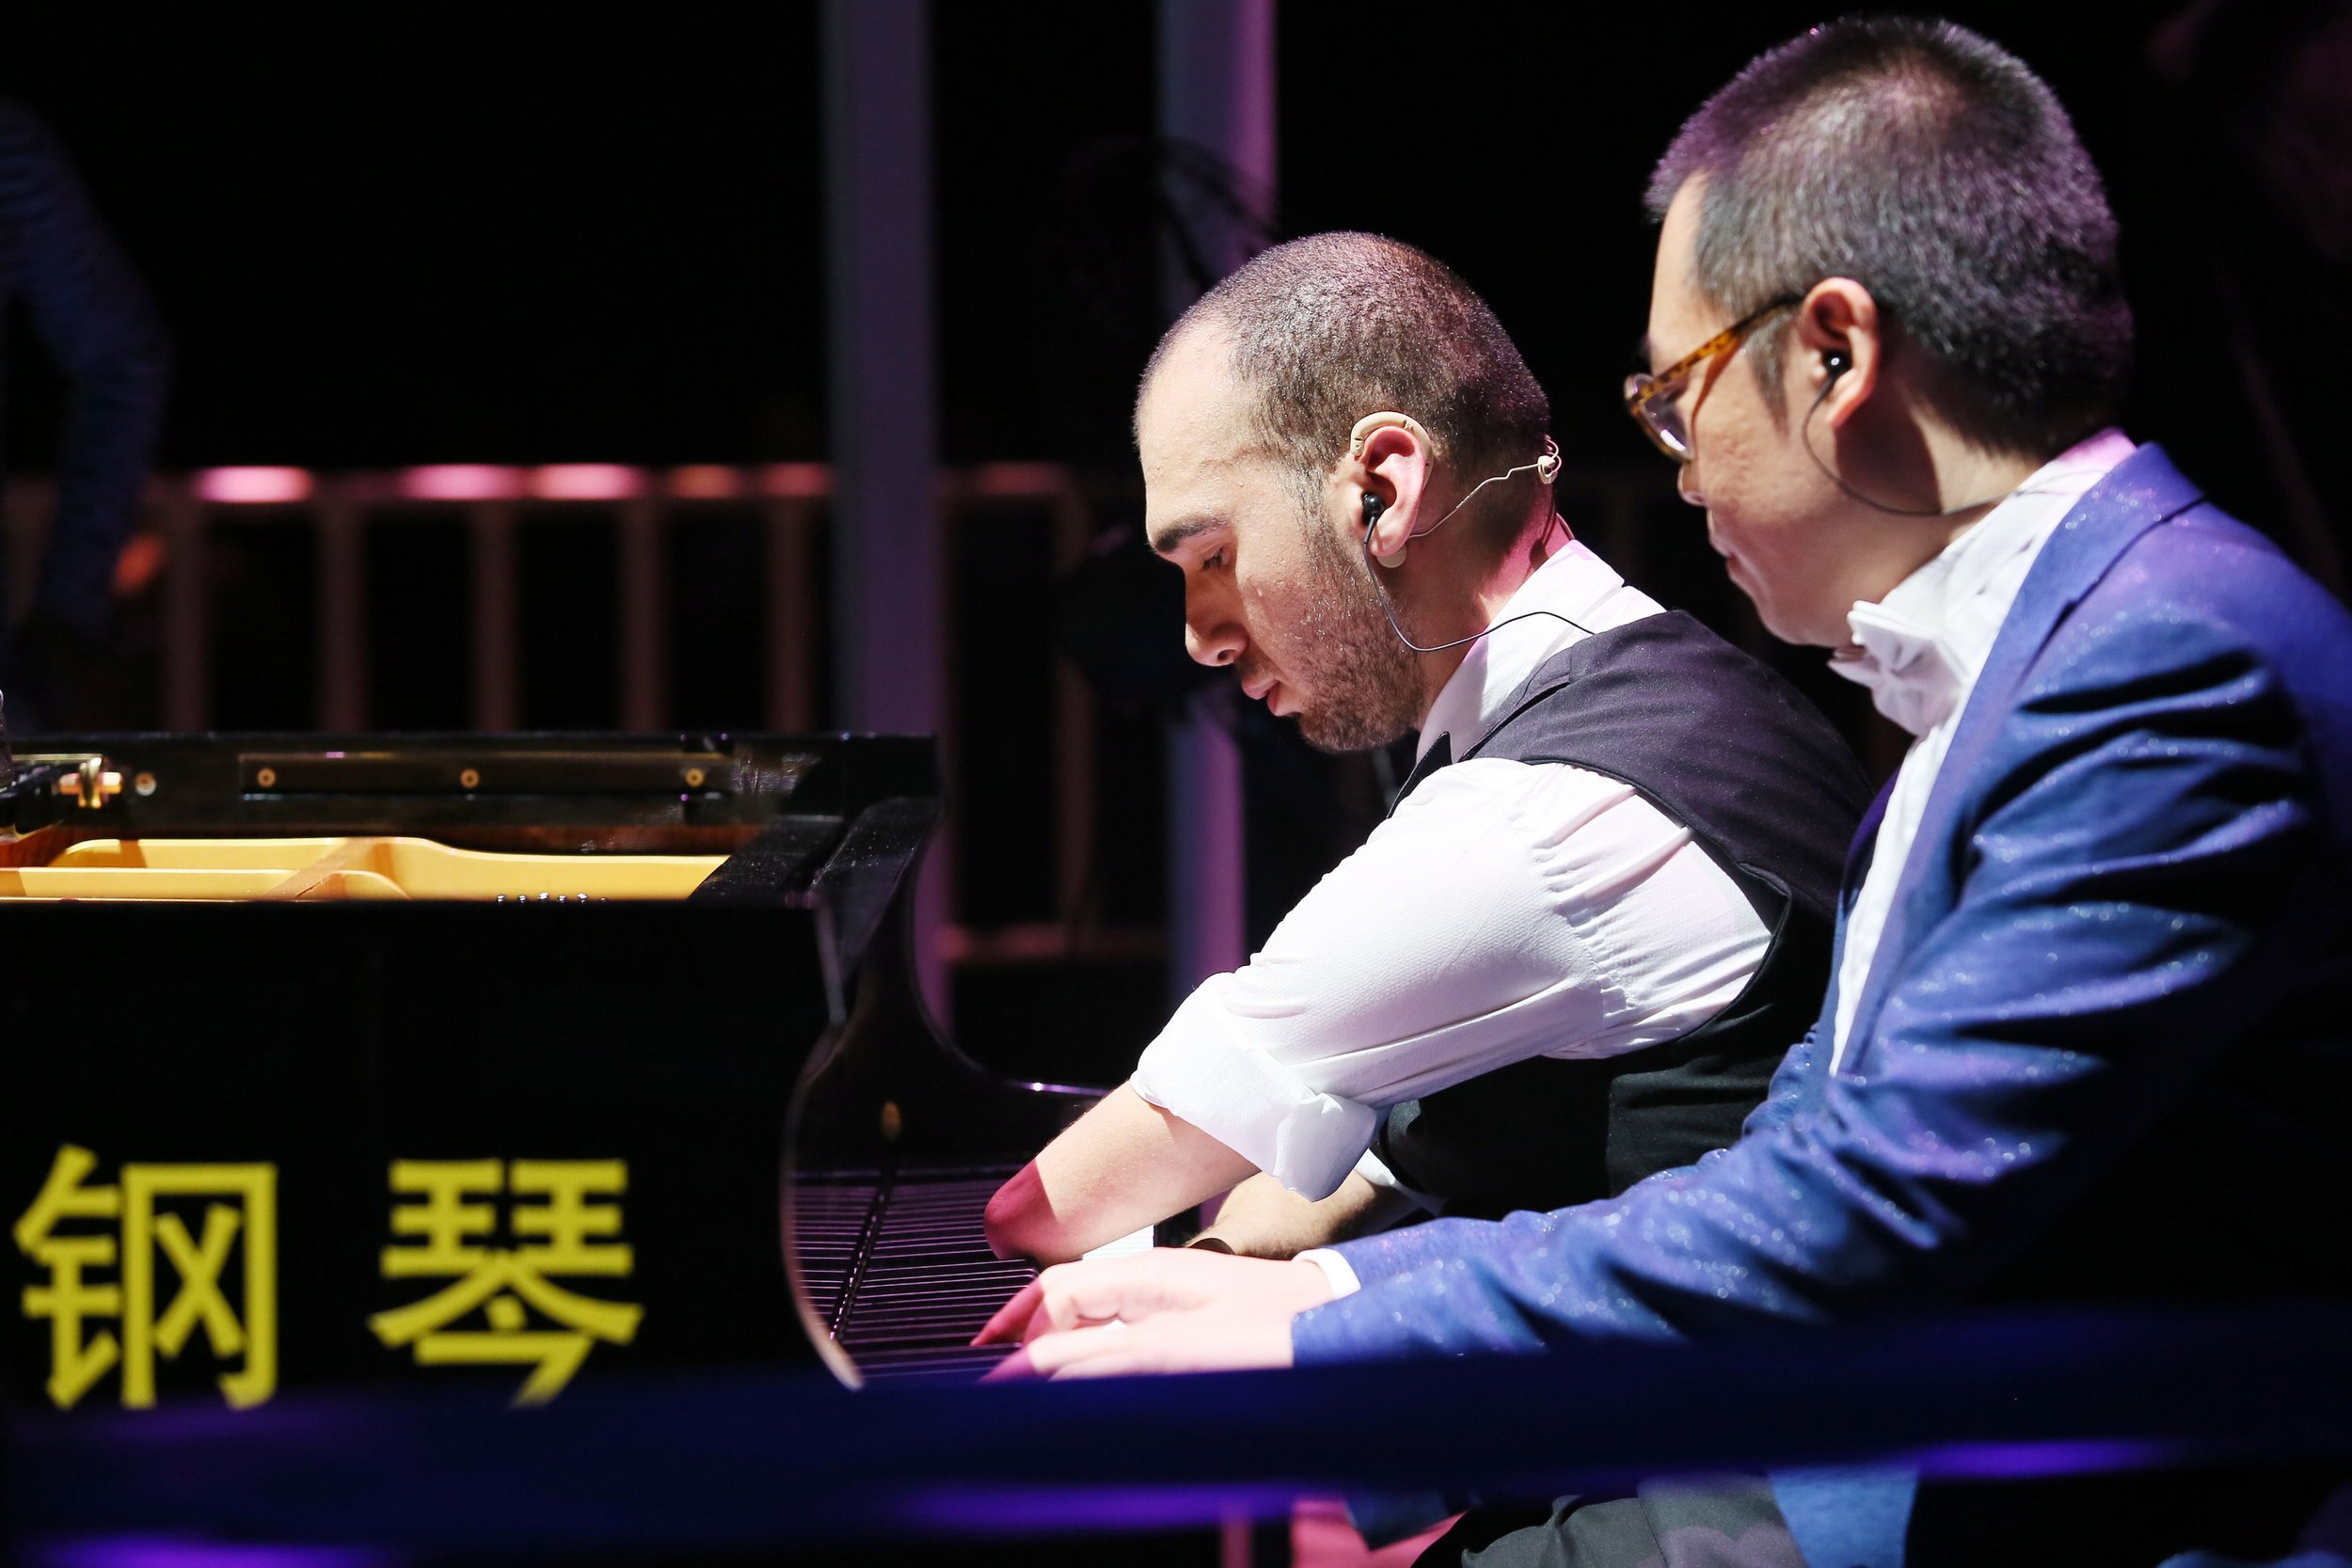 Mahdi+Gilbert+playing+piano+without+hands+or+arms.jpg